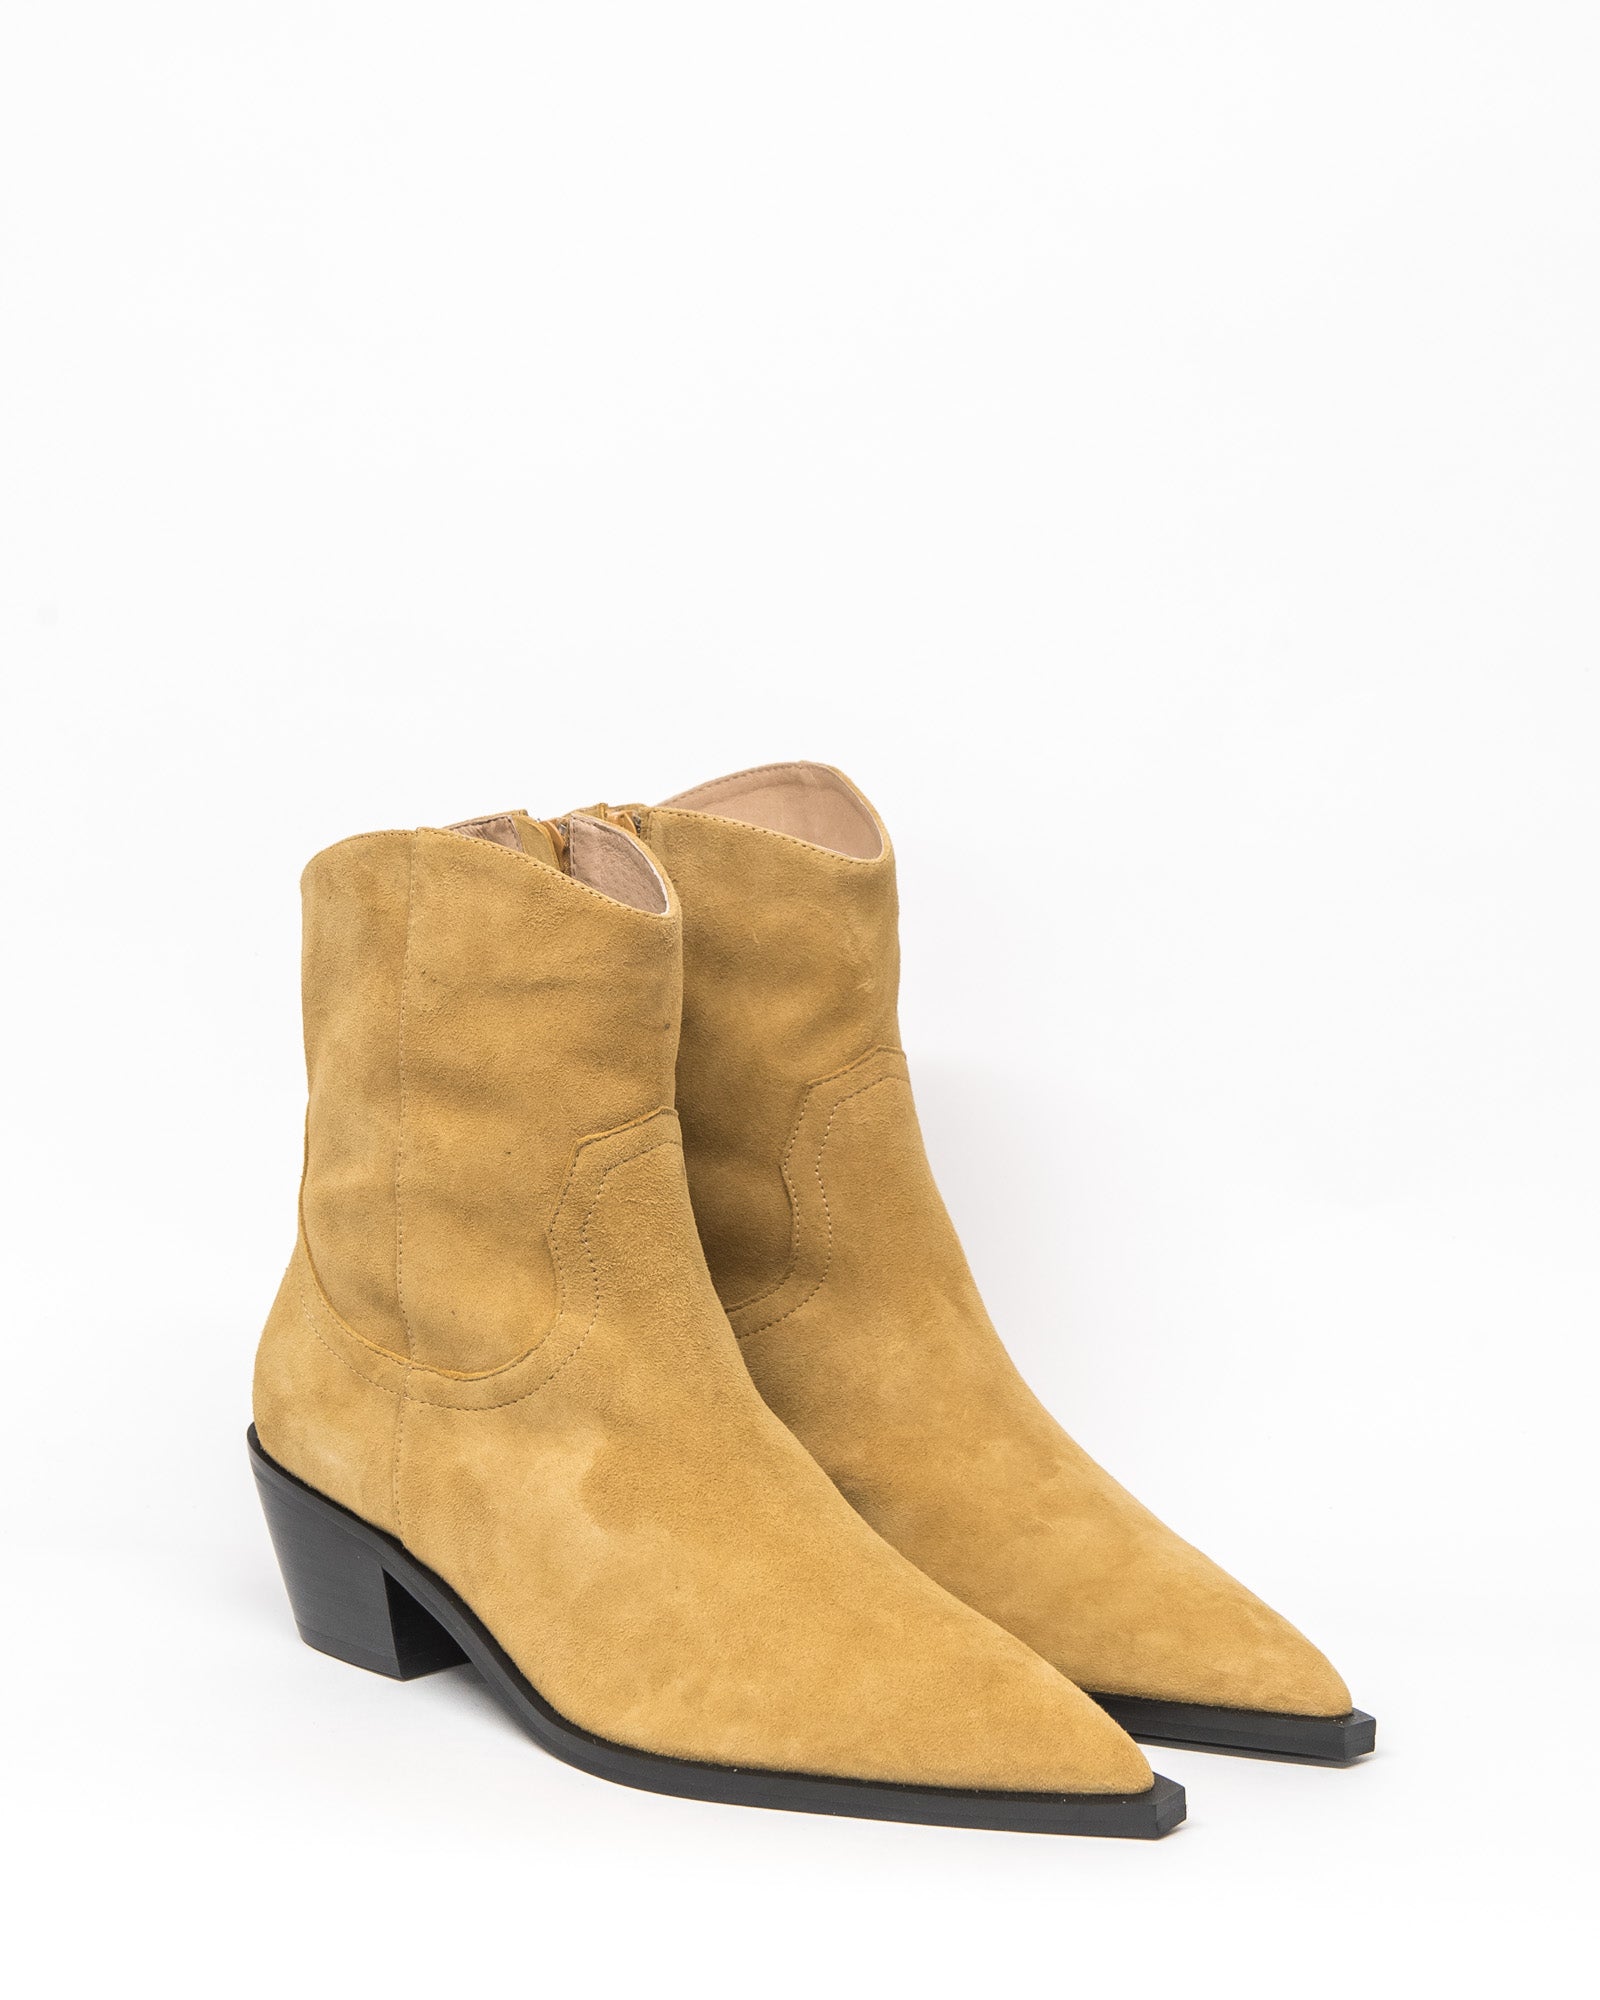 whip boot - taupe suede